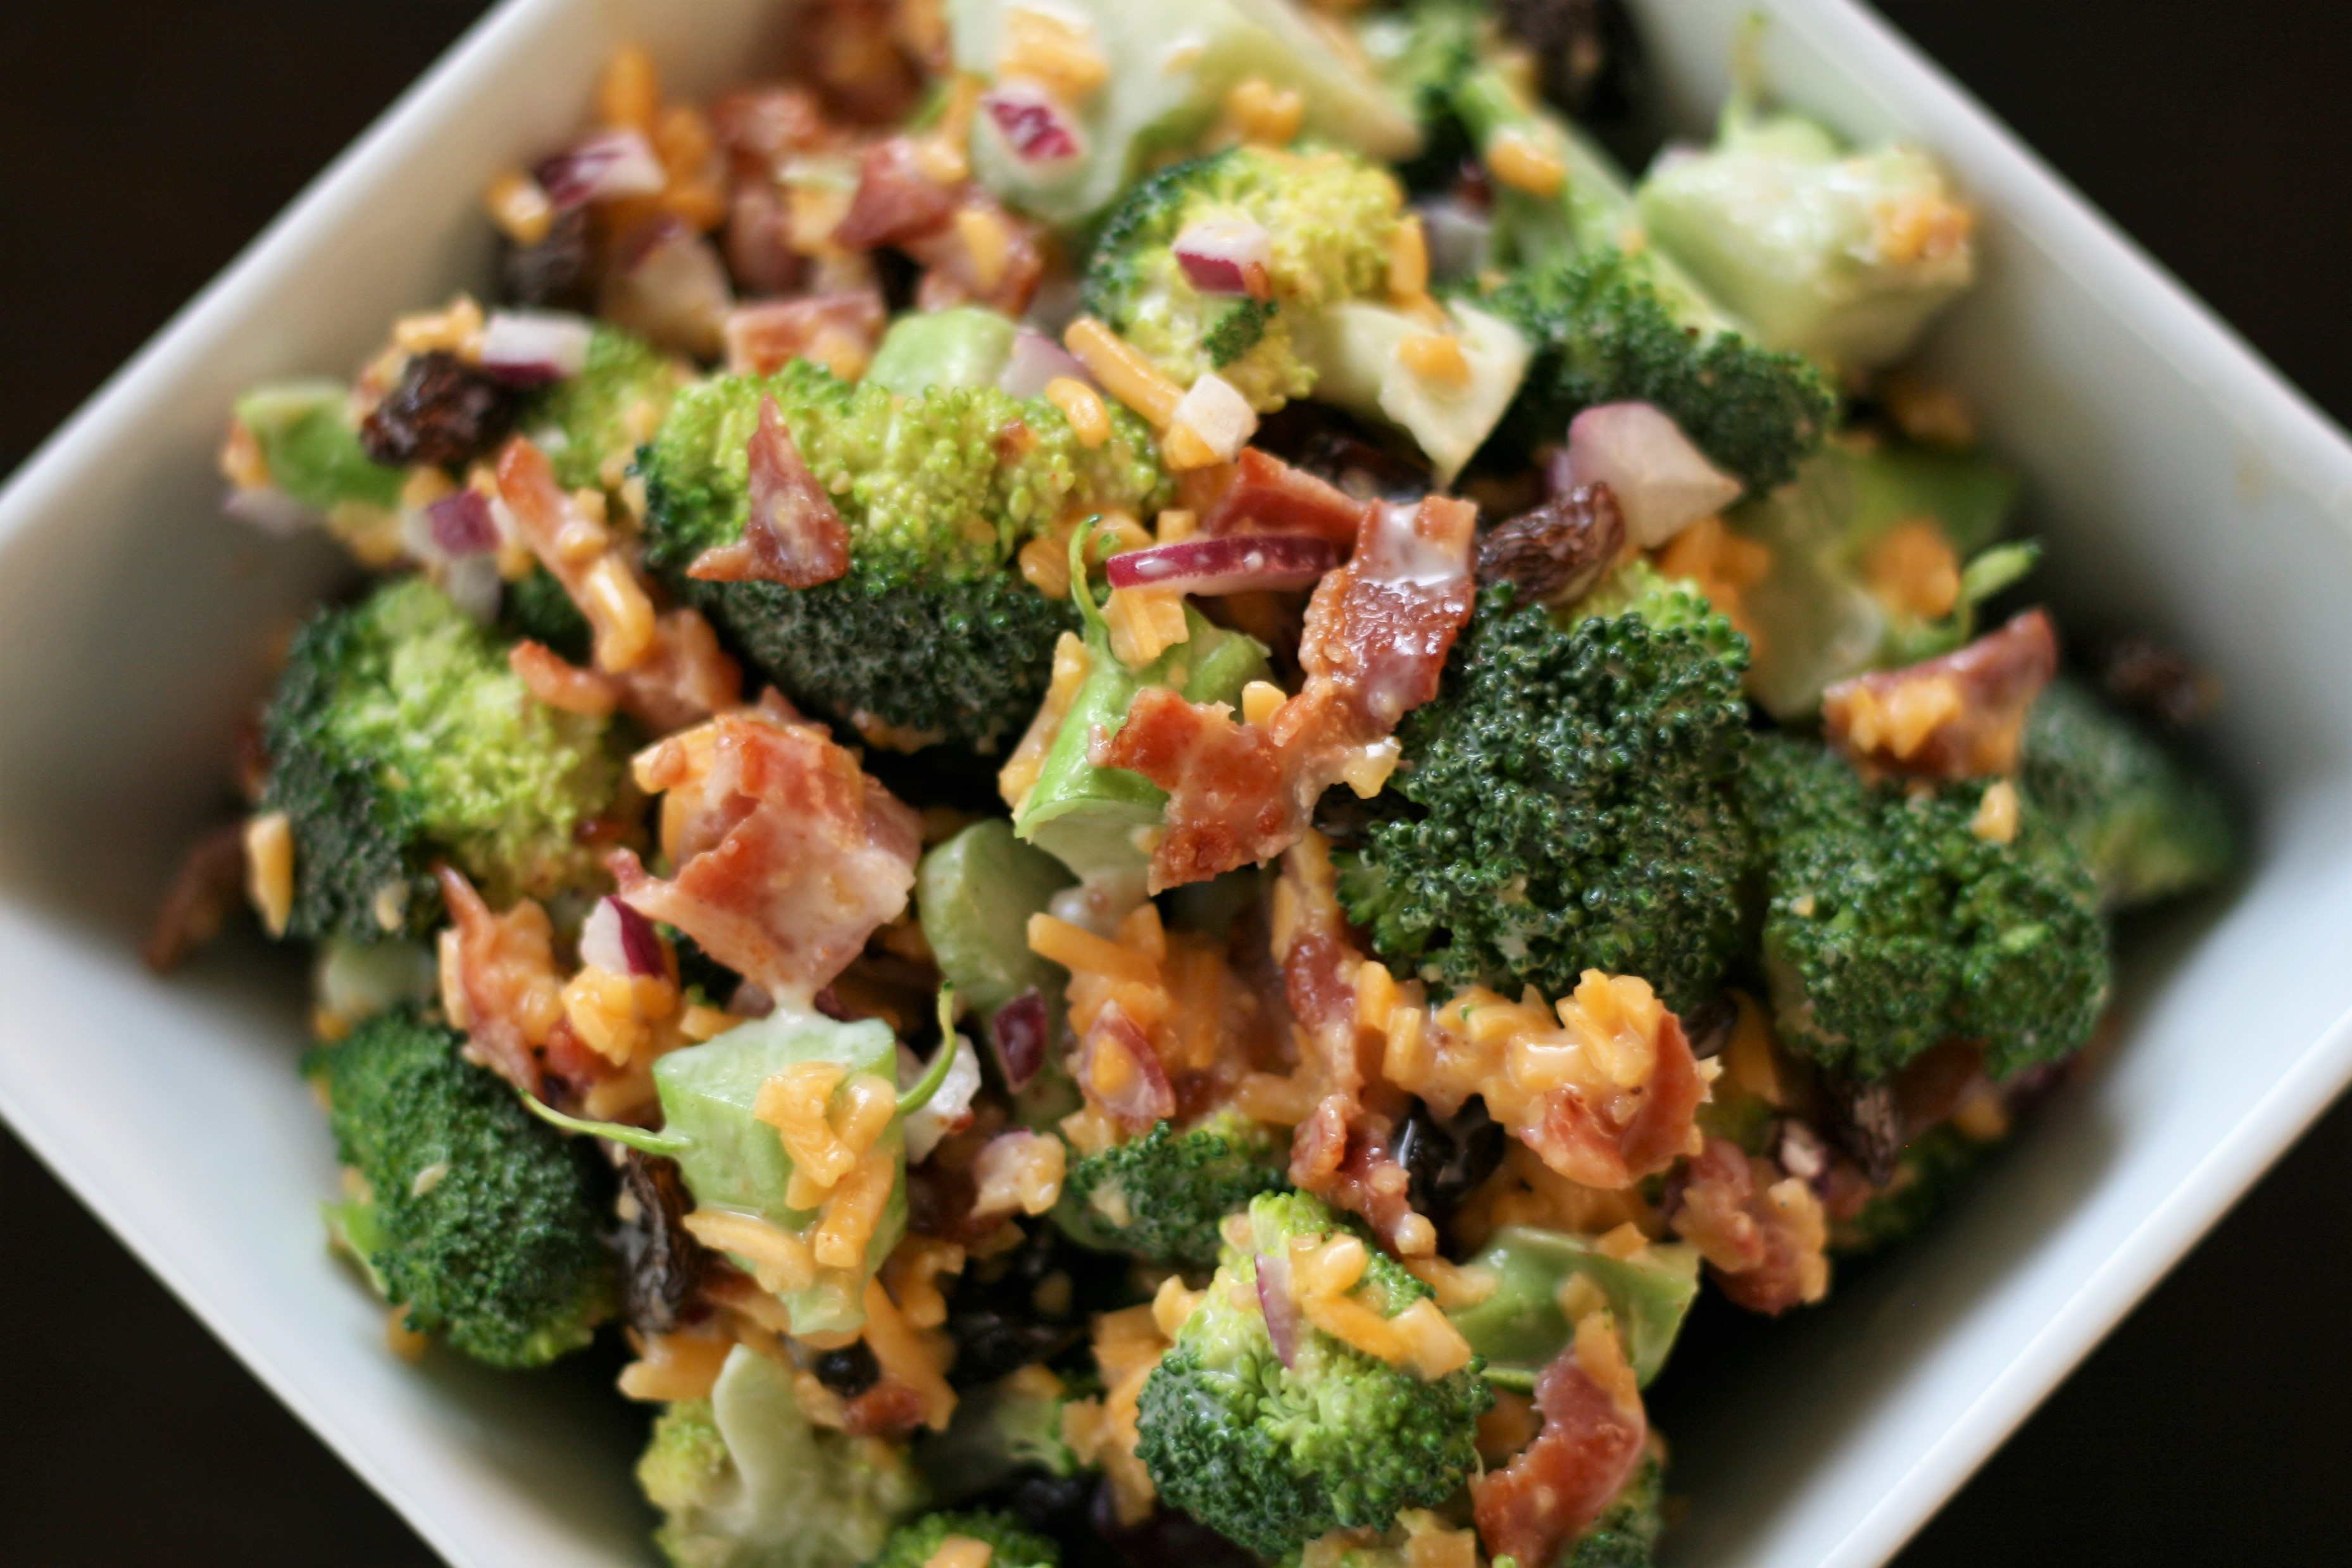 Martie's Broccoli Salad with Bacon and Cheese